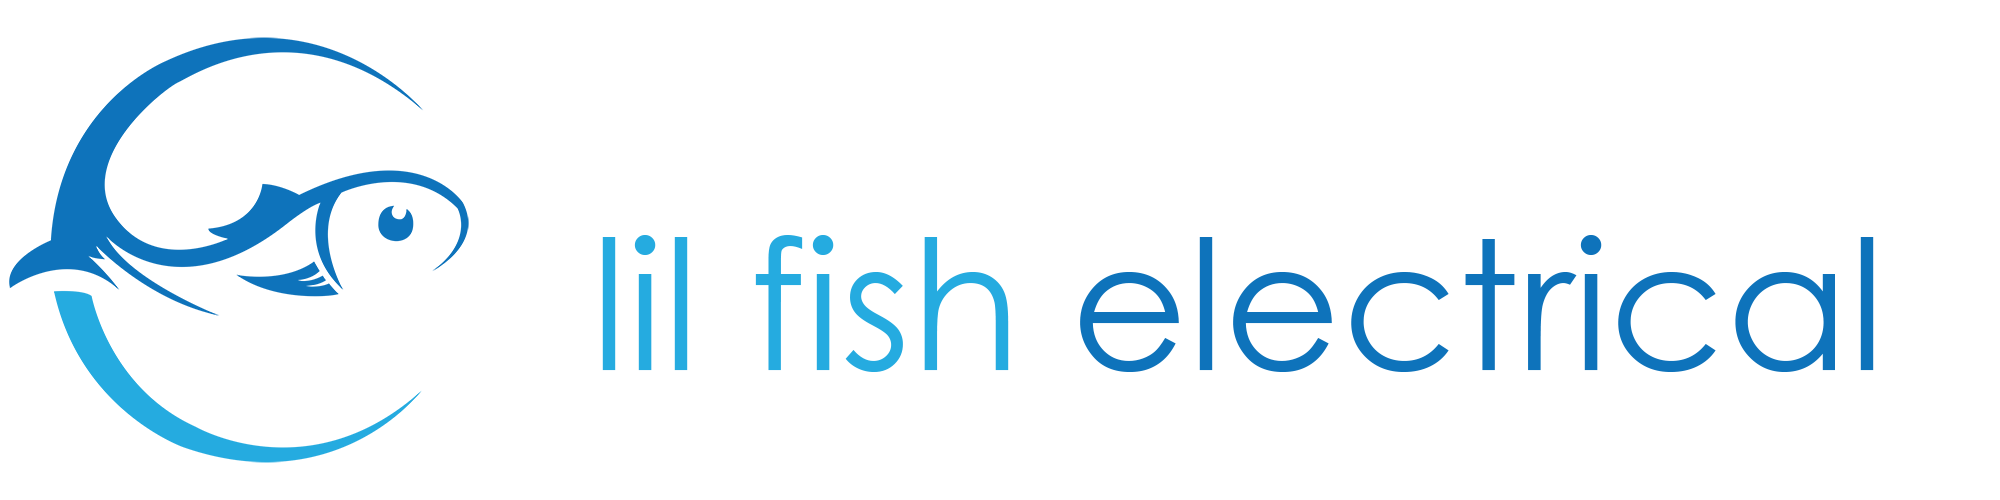 Lil Fish Electrical